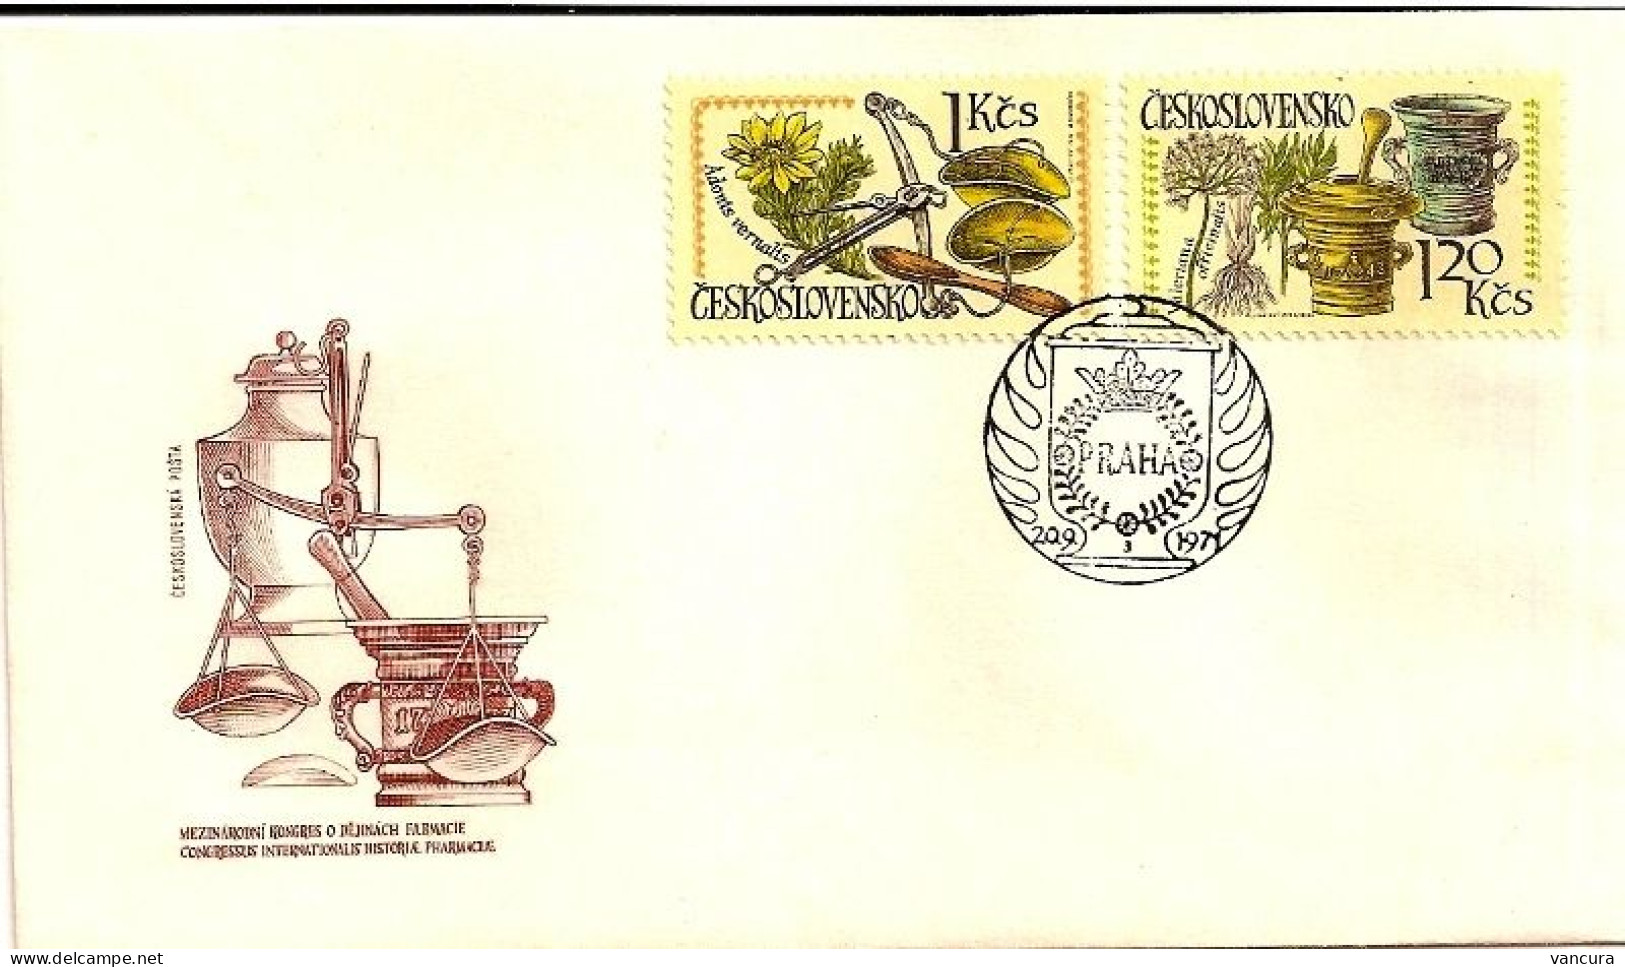 FDC 1914-9 Czechoslovakia Medicinal Herbs 1971 NOTICE! POOR SCAN, BUT THE FDC'S ARE FINE - Pharmacy